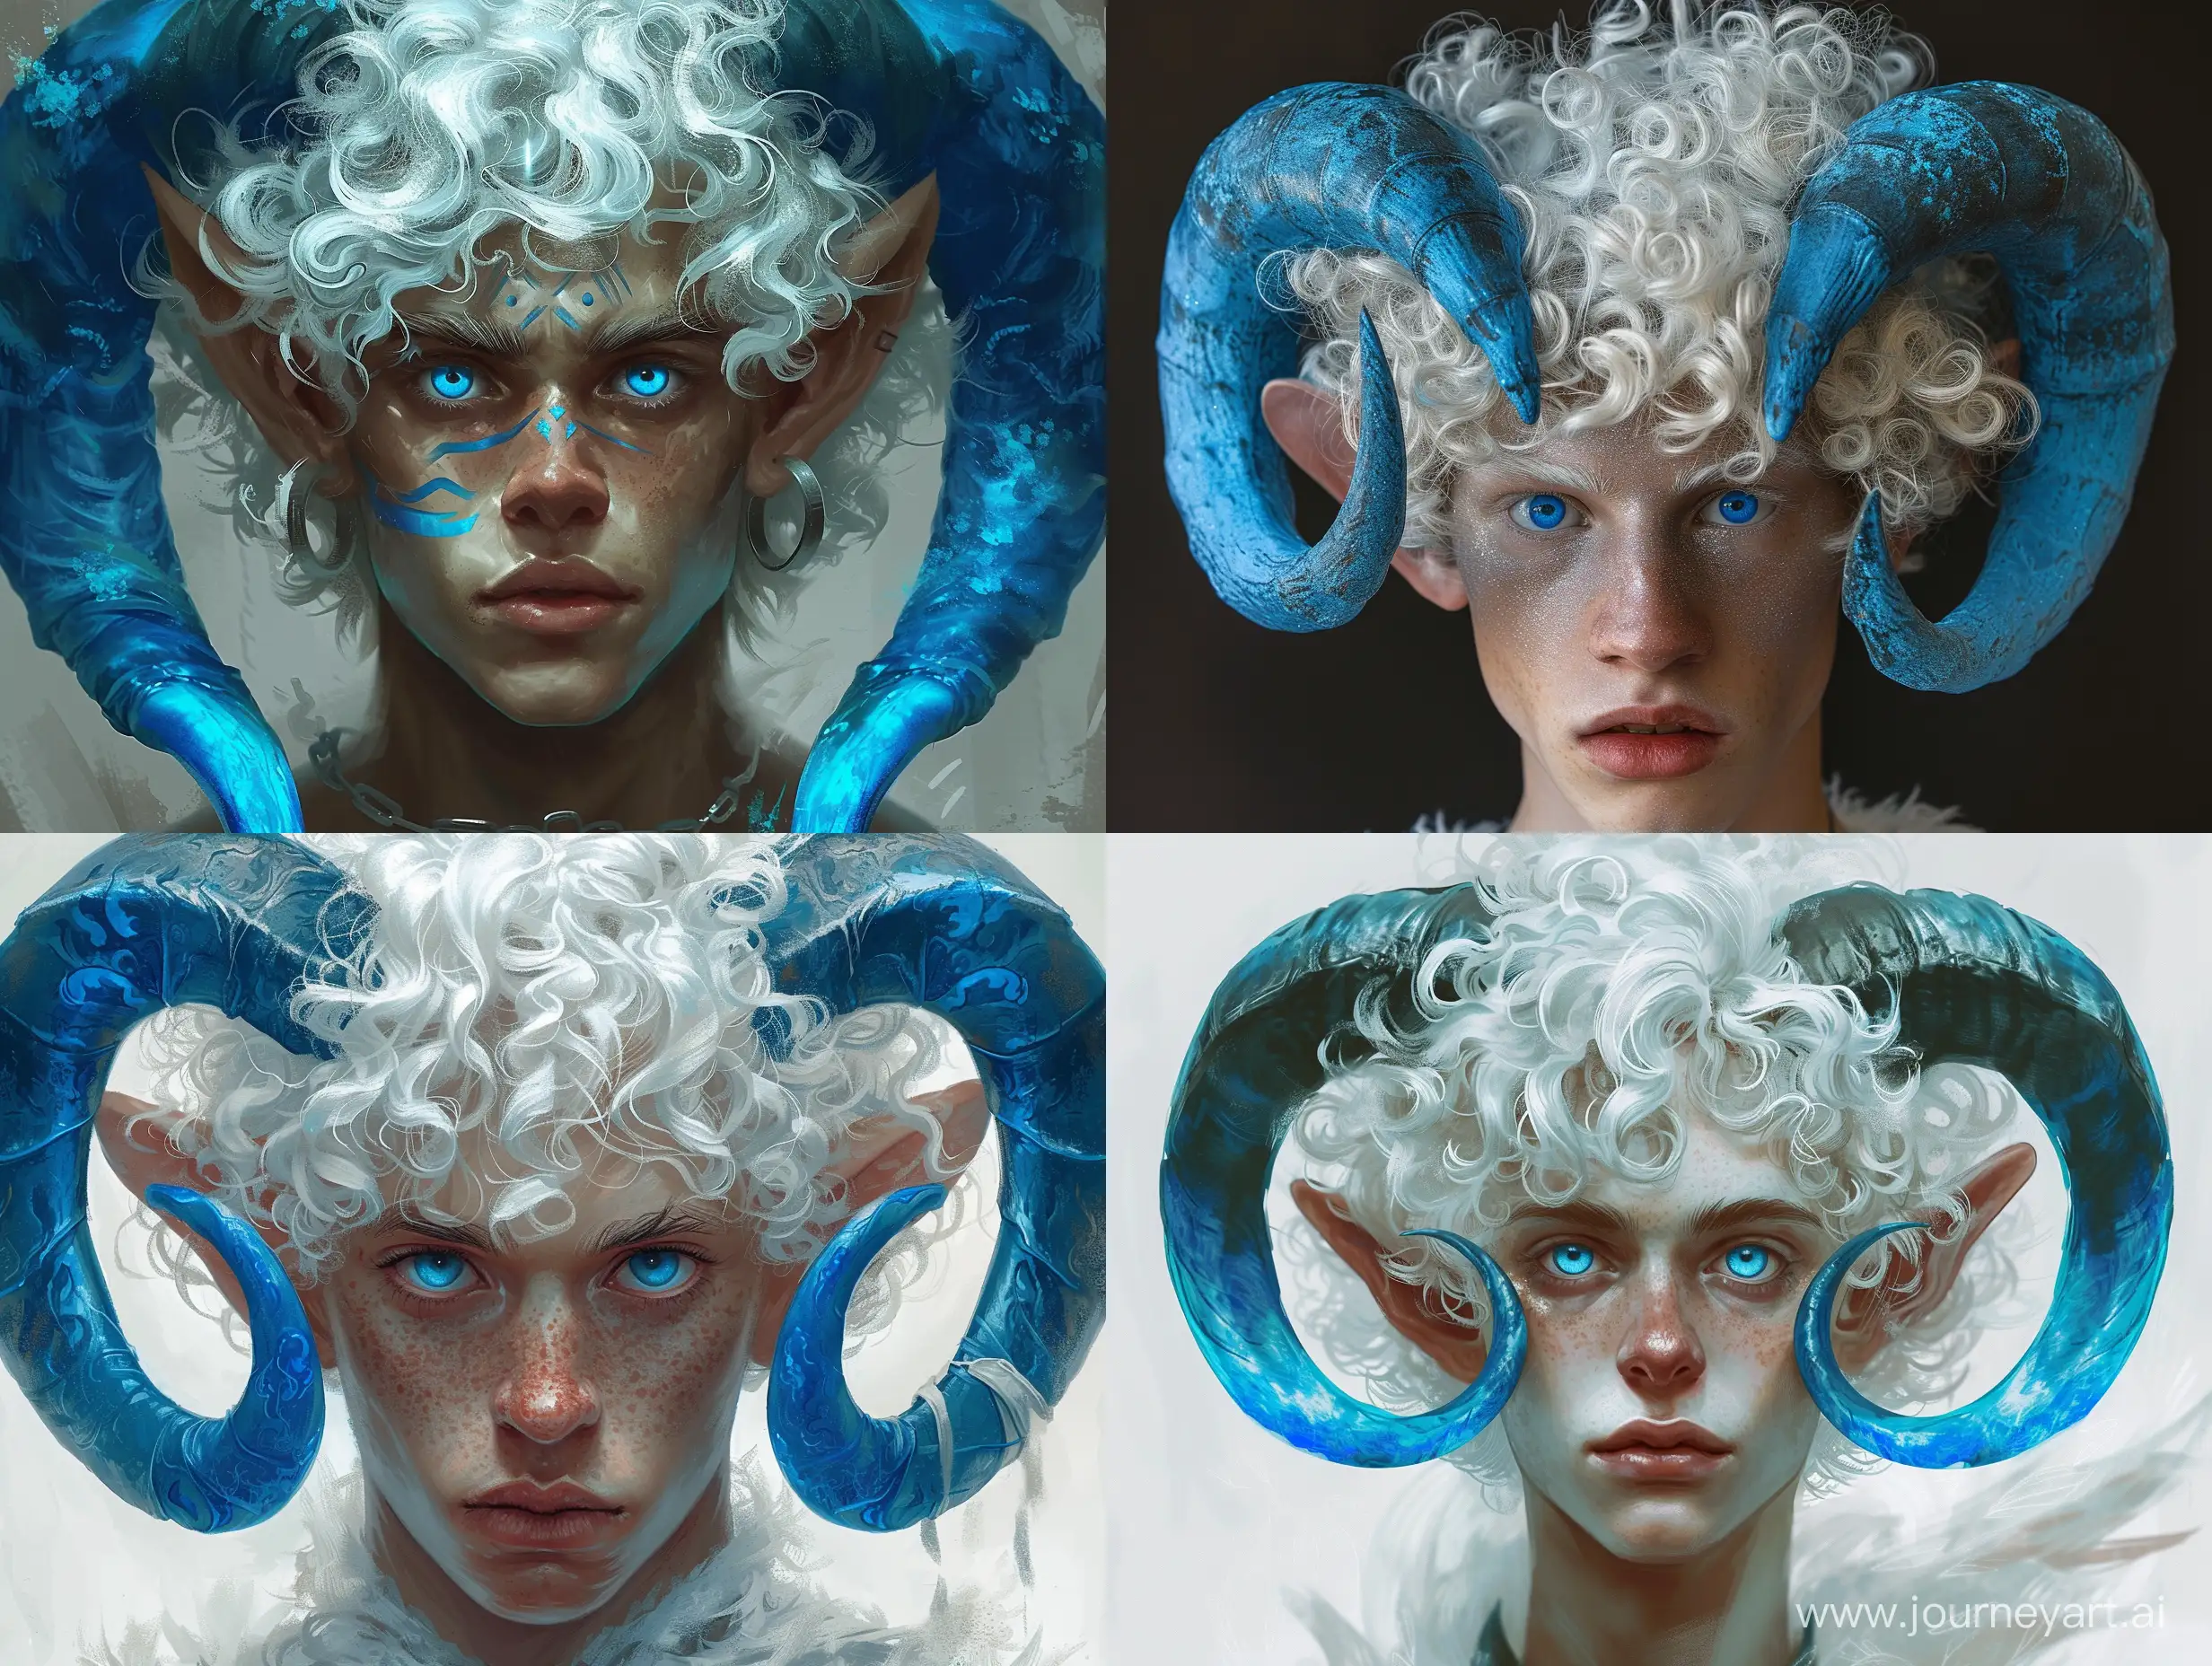 Whimsical-Creature-with-White-Curly-Hair-Blue-Eyes-and-Big-Blue-Horns